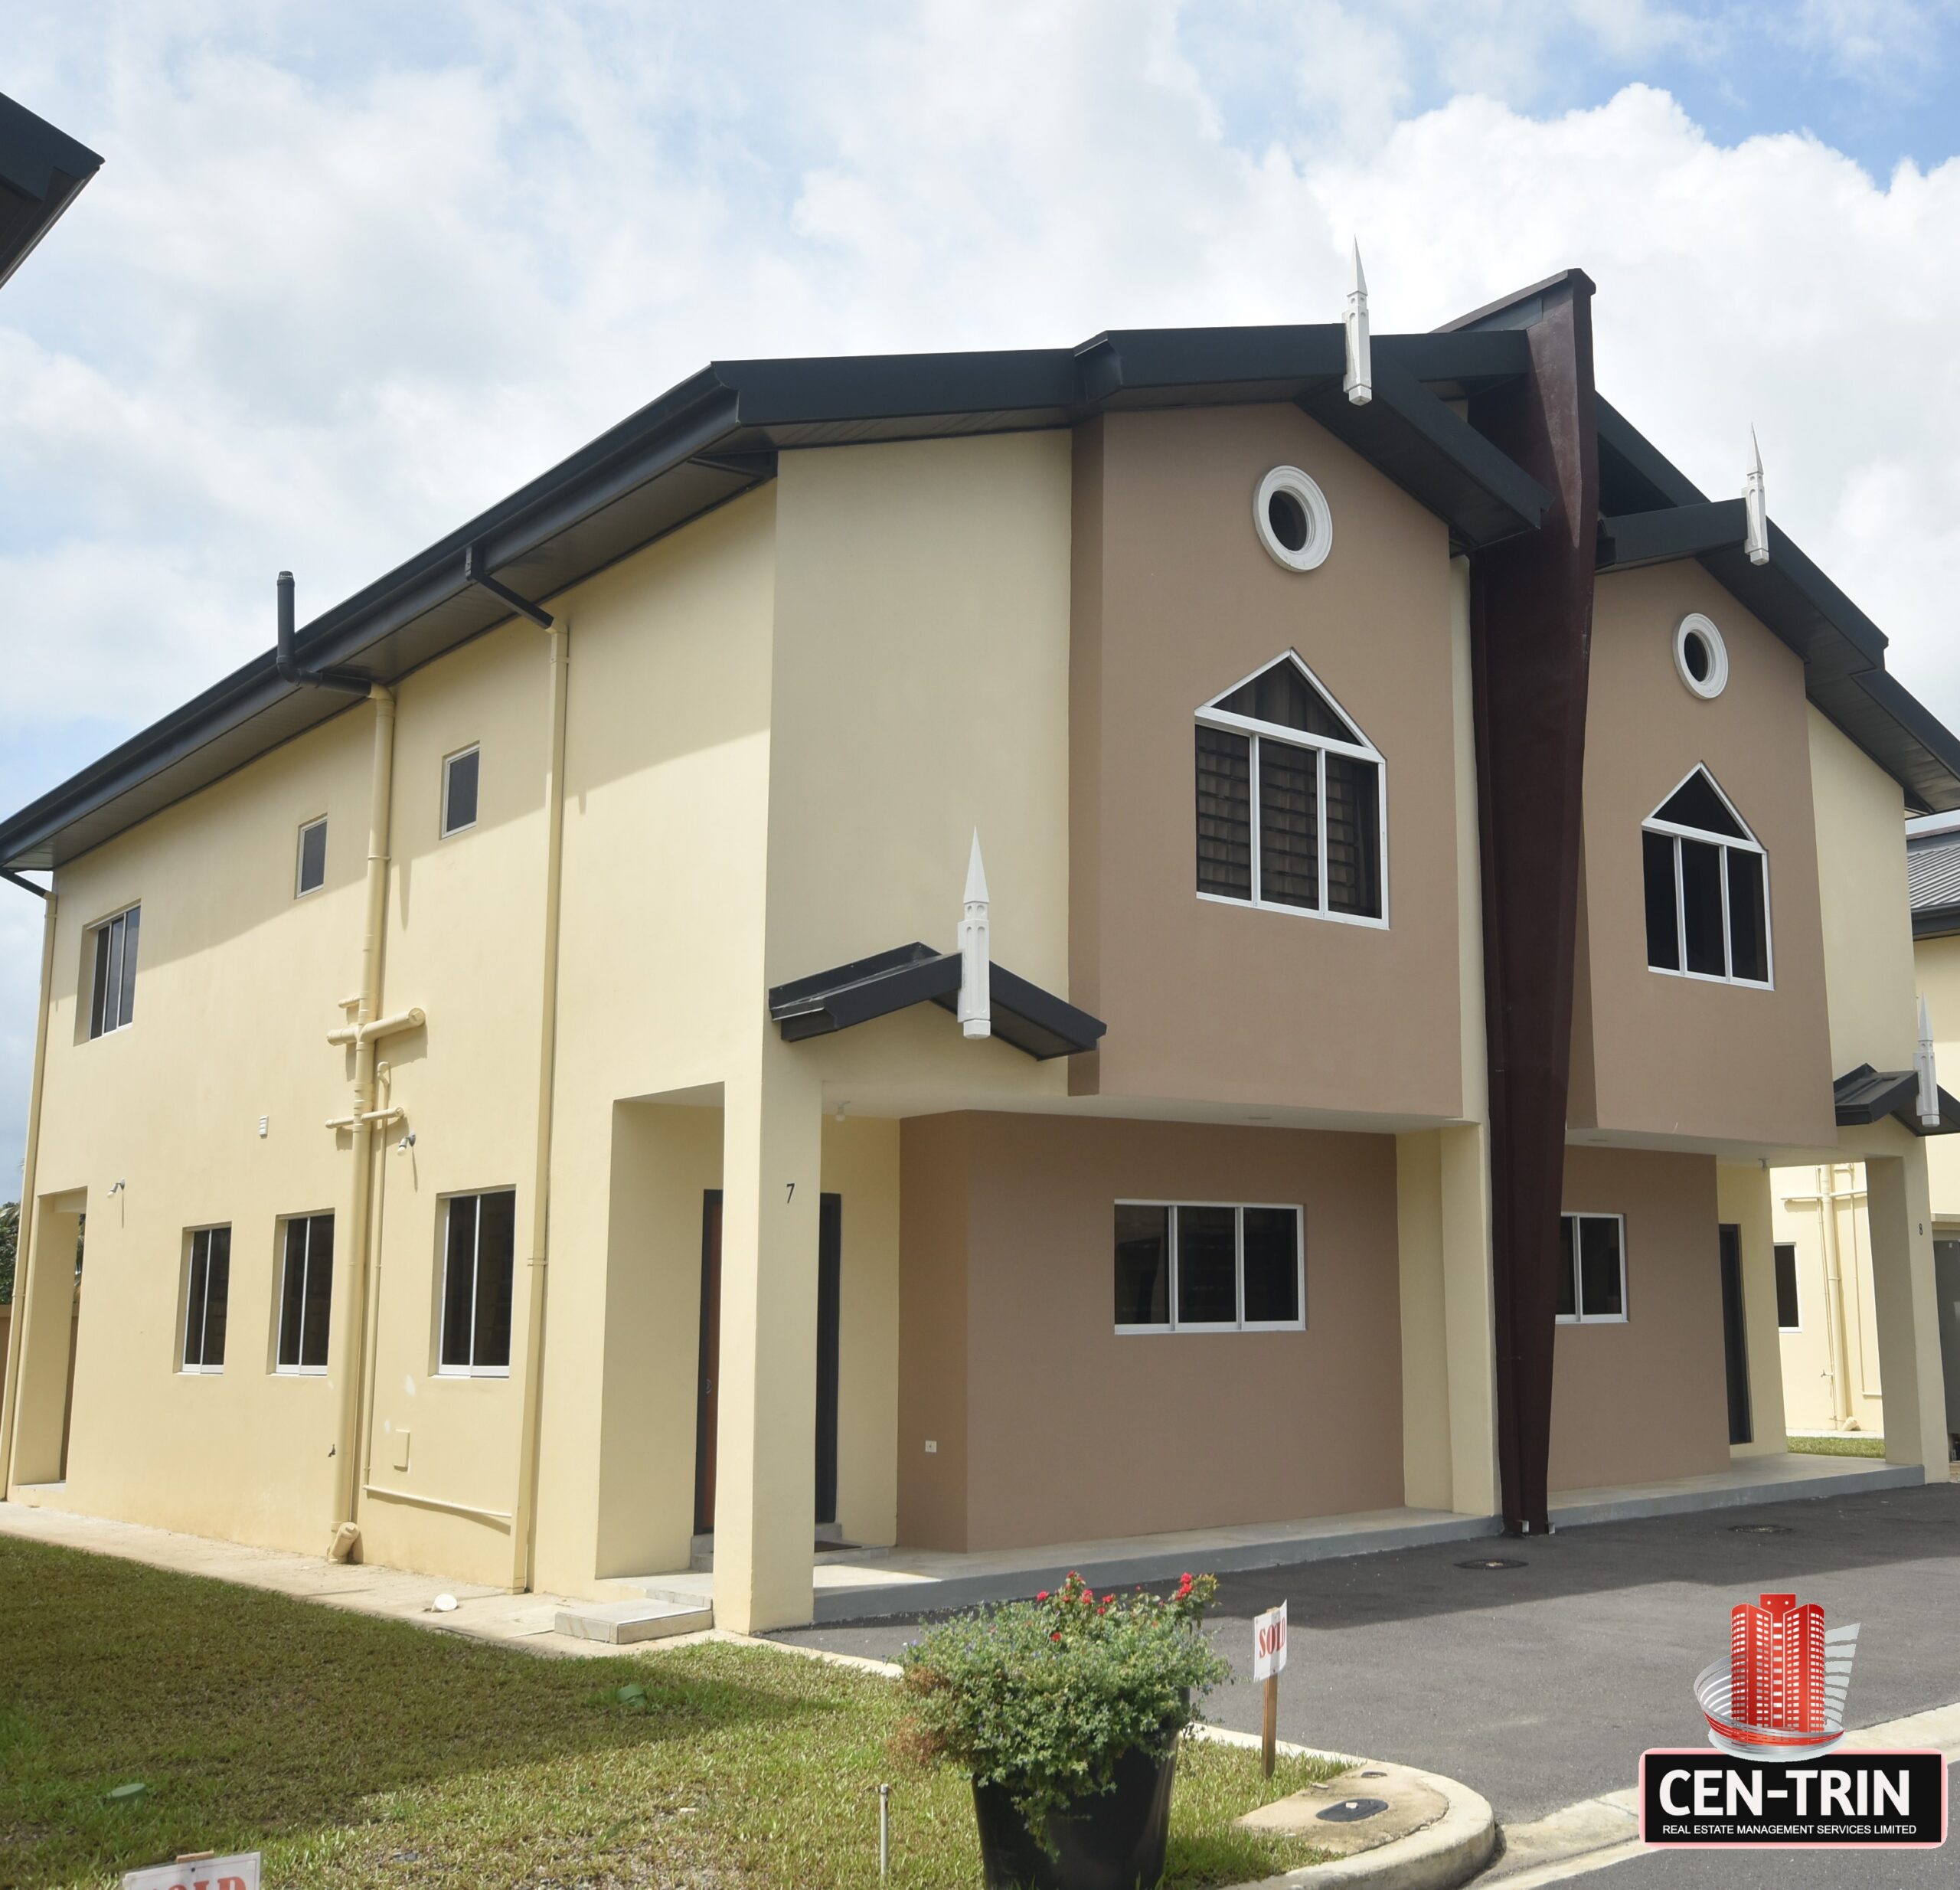 Cen-Trin Real Estate Management Services Limited - Luxury Piarco Townhomes: Modern 3 Bed 2.5 Bath Gem (1880 Sq. Ft.)